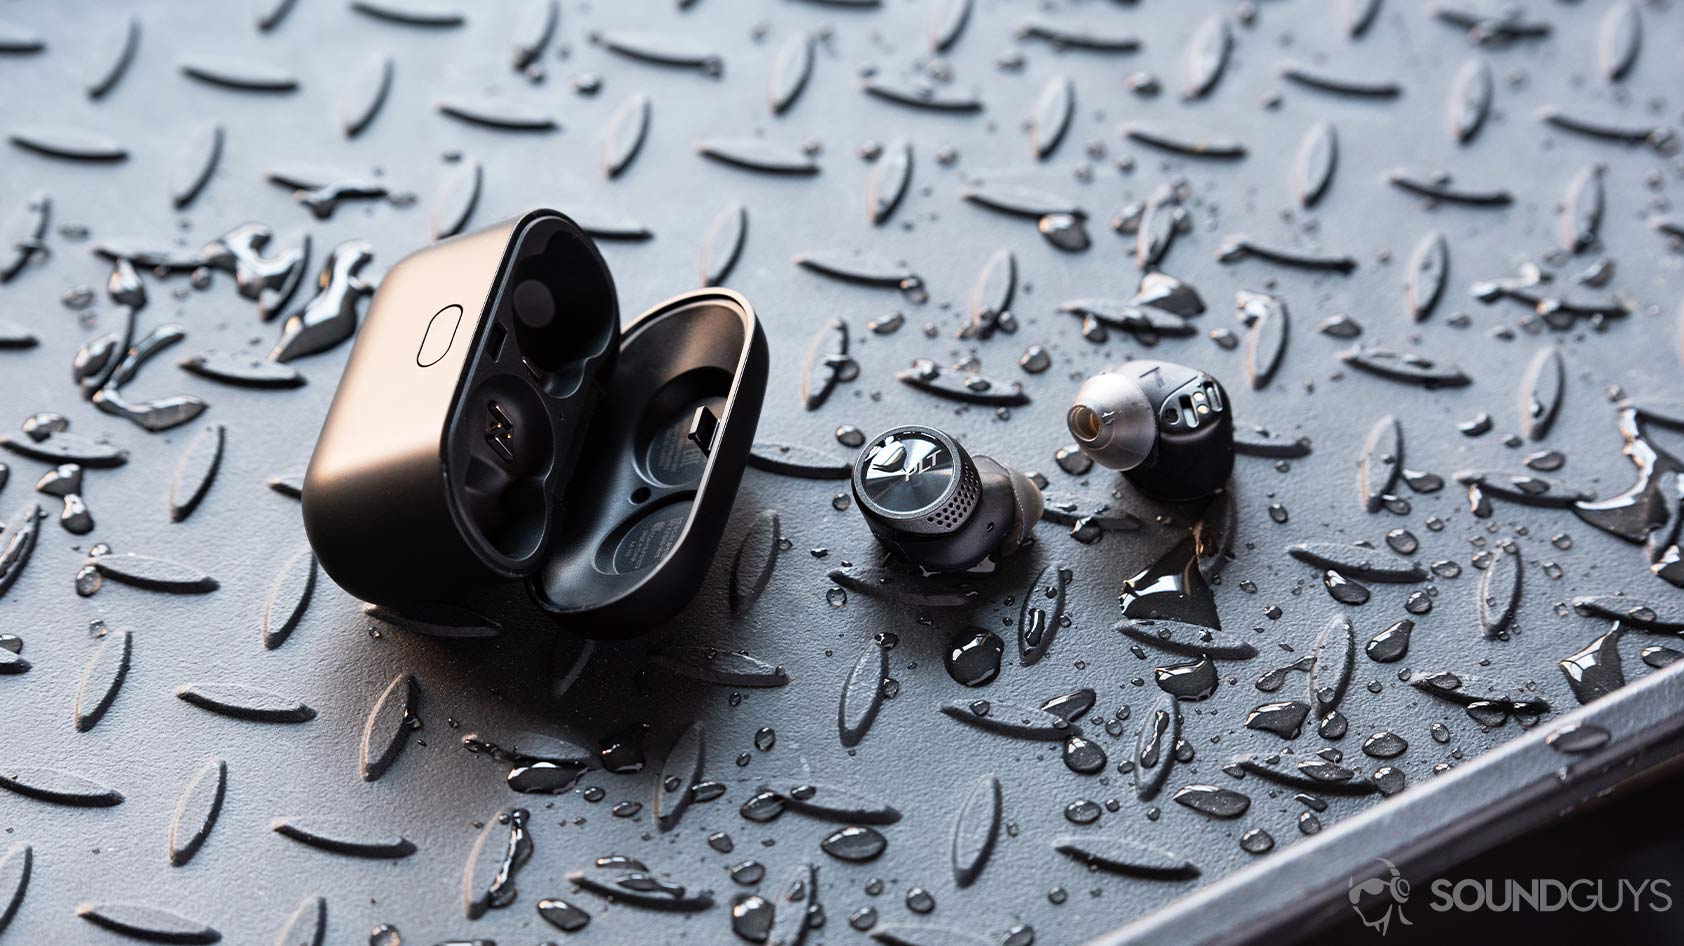 The Plantronics BackBeat Pro 5100 true wireless earbuds outside of the case and surrounded by water splashes.